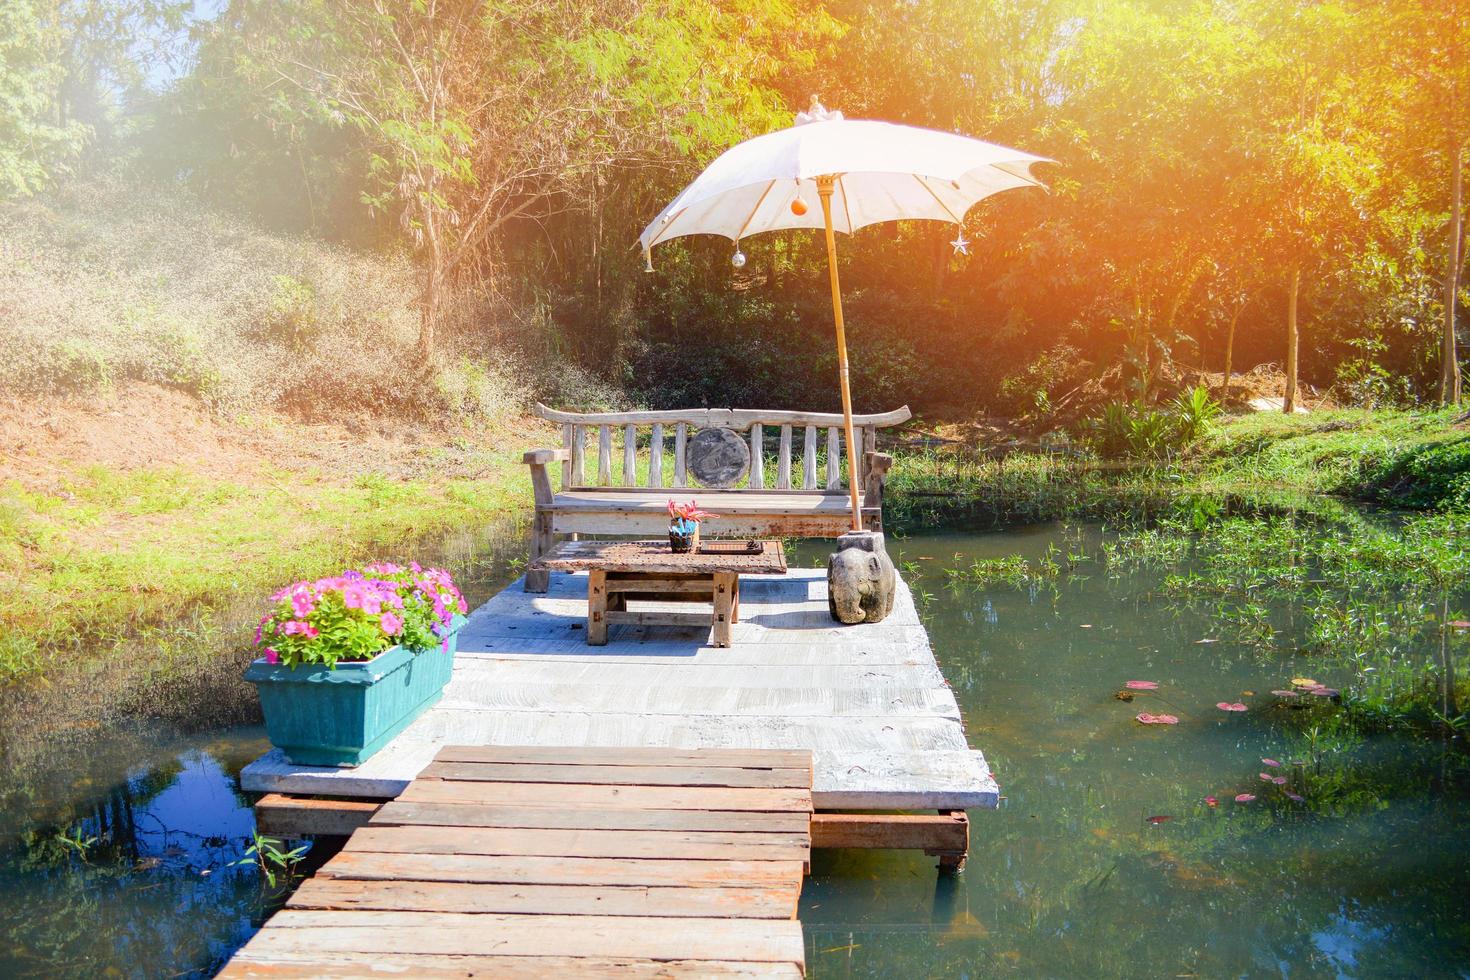 bench on the terrace garden and wooden bridge walkway on water pond and table with umbrella in summer photo